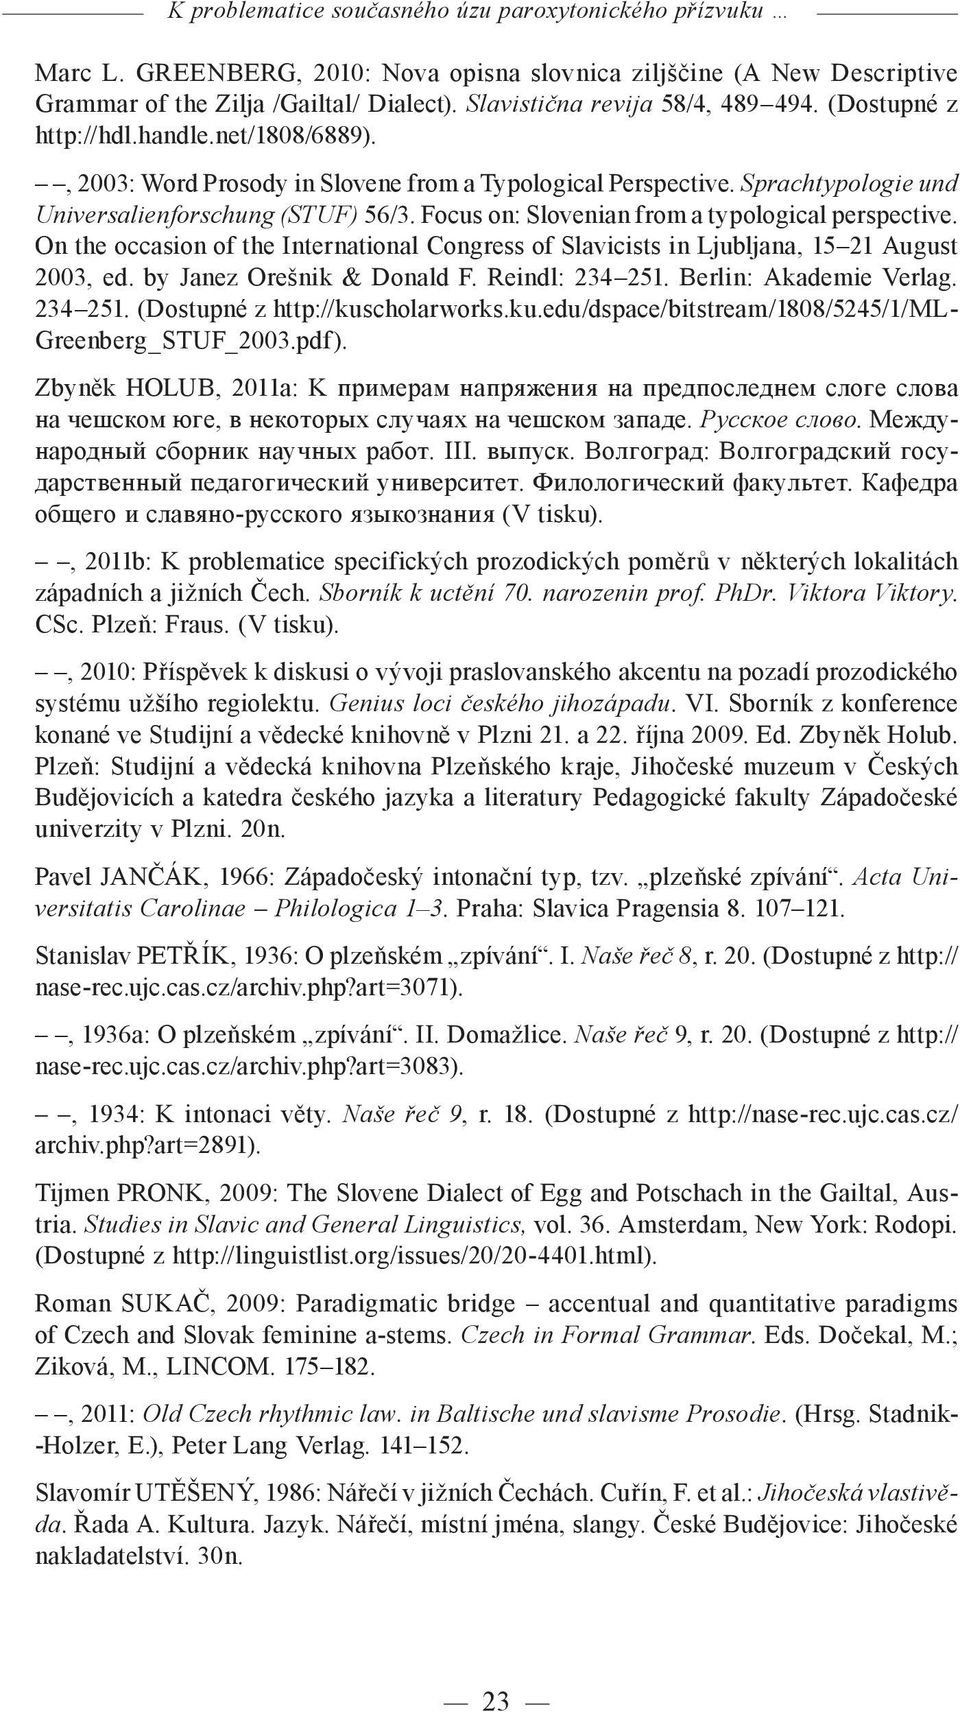 Focus on: Slovenian from a typological perspective. On the occasion of the International Congress of Slavicists in Ljubljana, 15 21 August 2003, ed. by Janez Orešnik & Donald F. Reindl: 234 251.